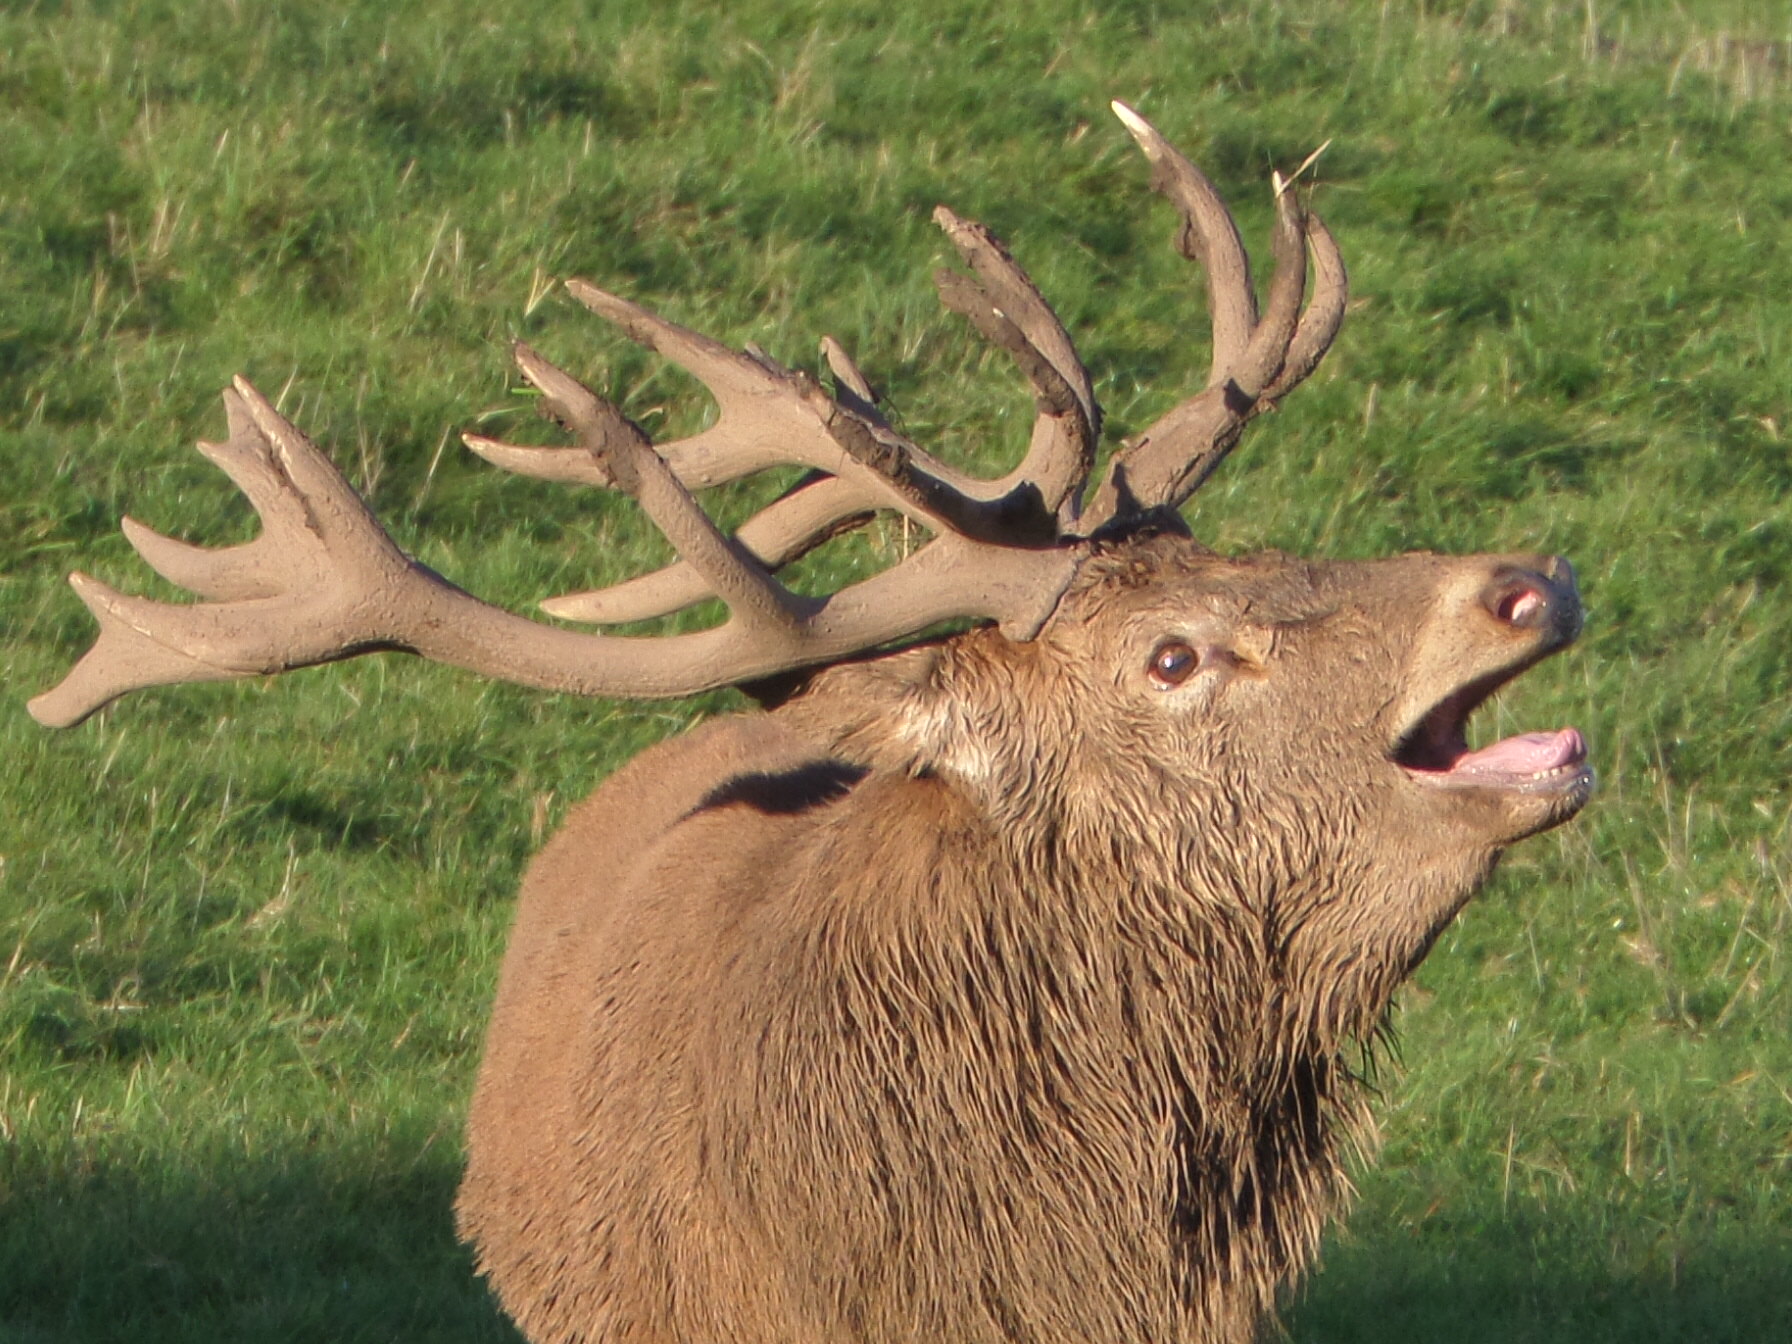 A male red deer stag with large antlers has his mouth open to let out a roar in the autumn breeding season.